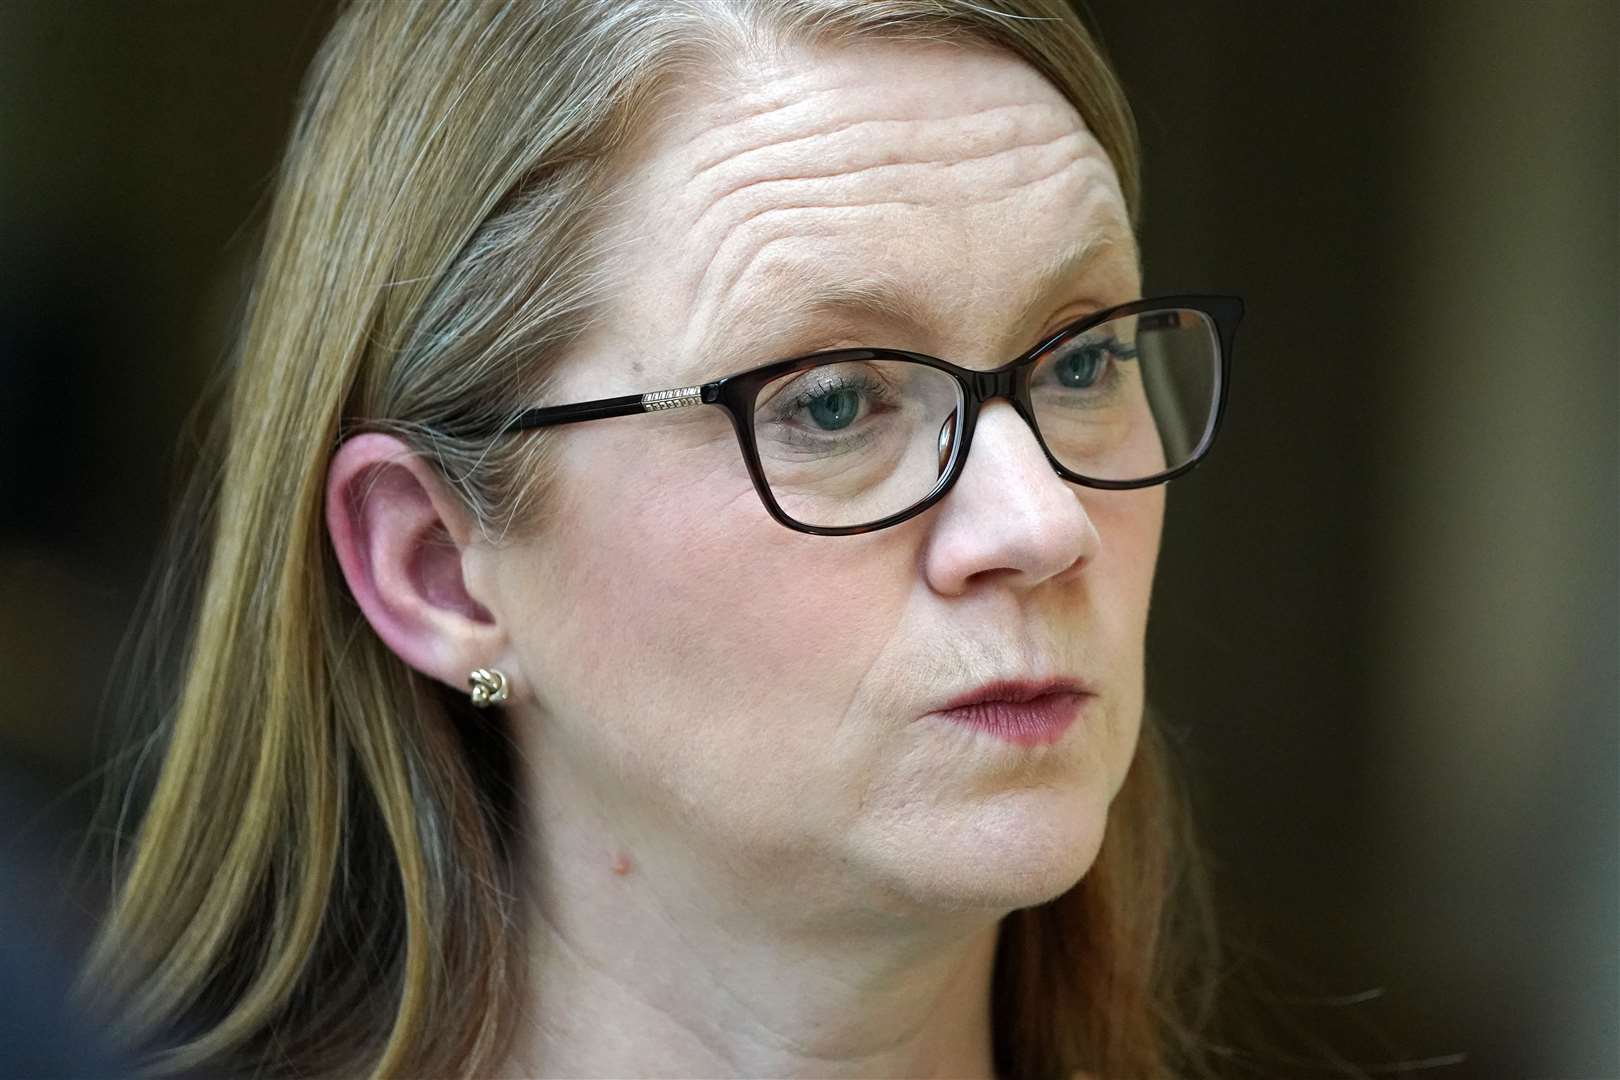 Shirley-Anne Somerville welcomed the result of the ballot (Andrew Milligan/PA)